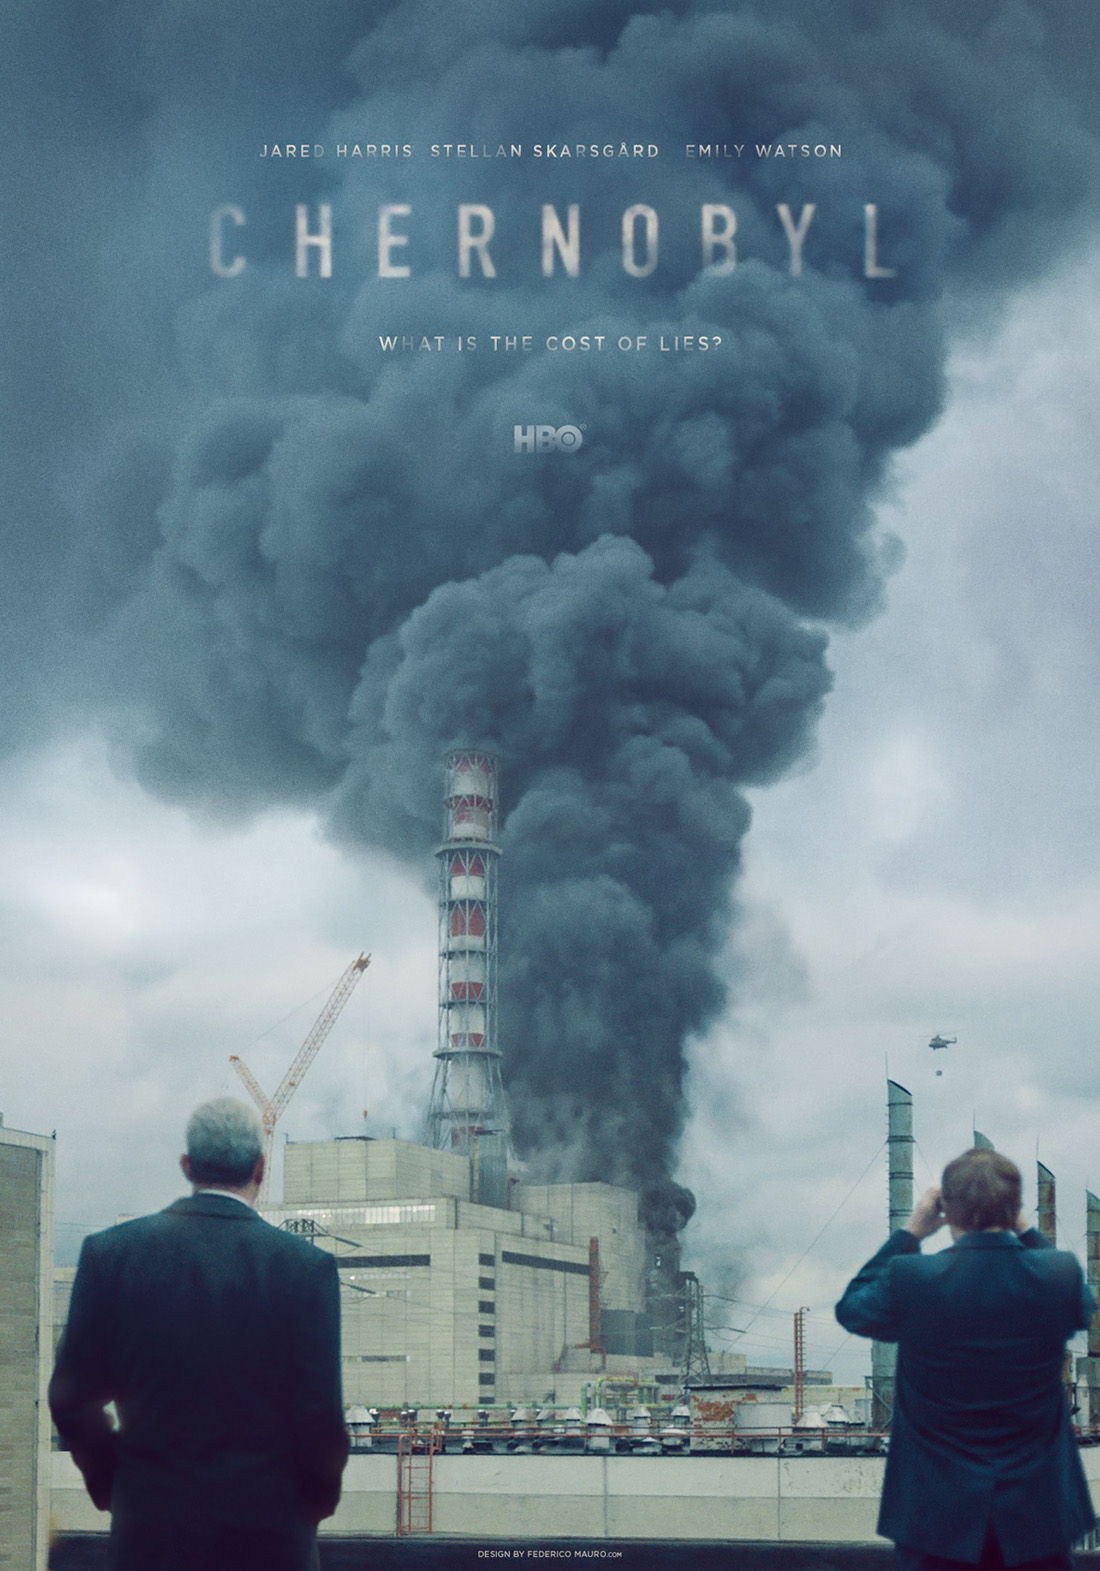 Chernobyl HBO Tv Series Disaster Poster Nuclear Power Plant Overcast 1100x1571